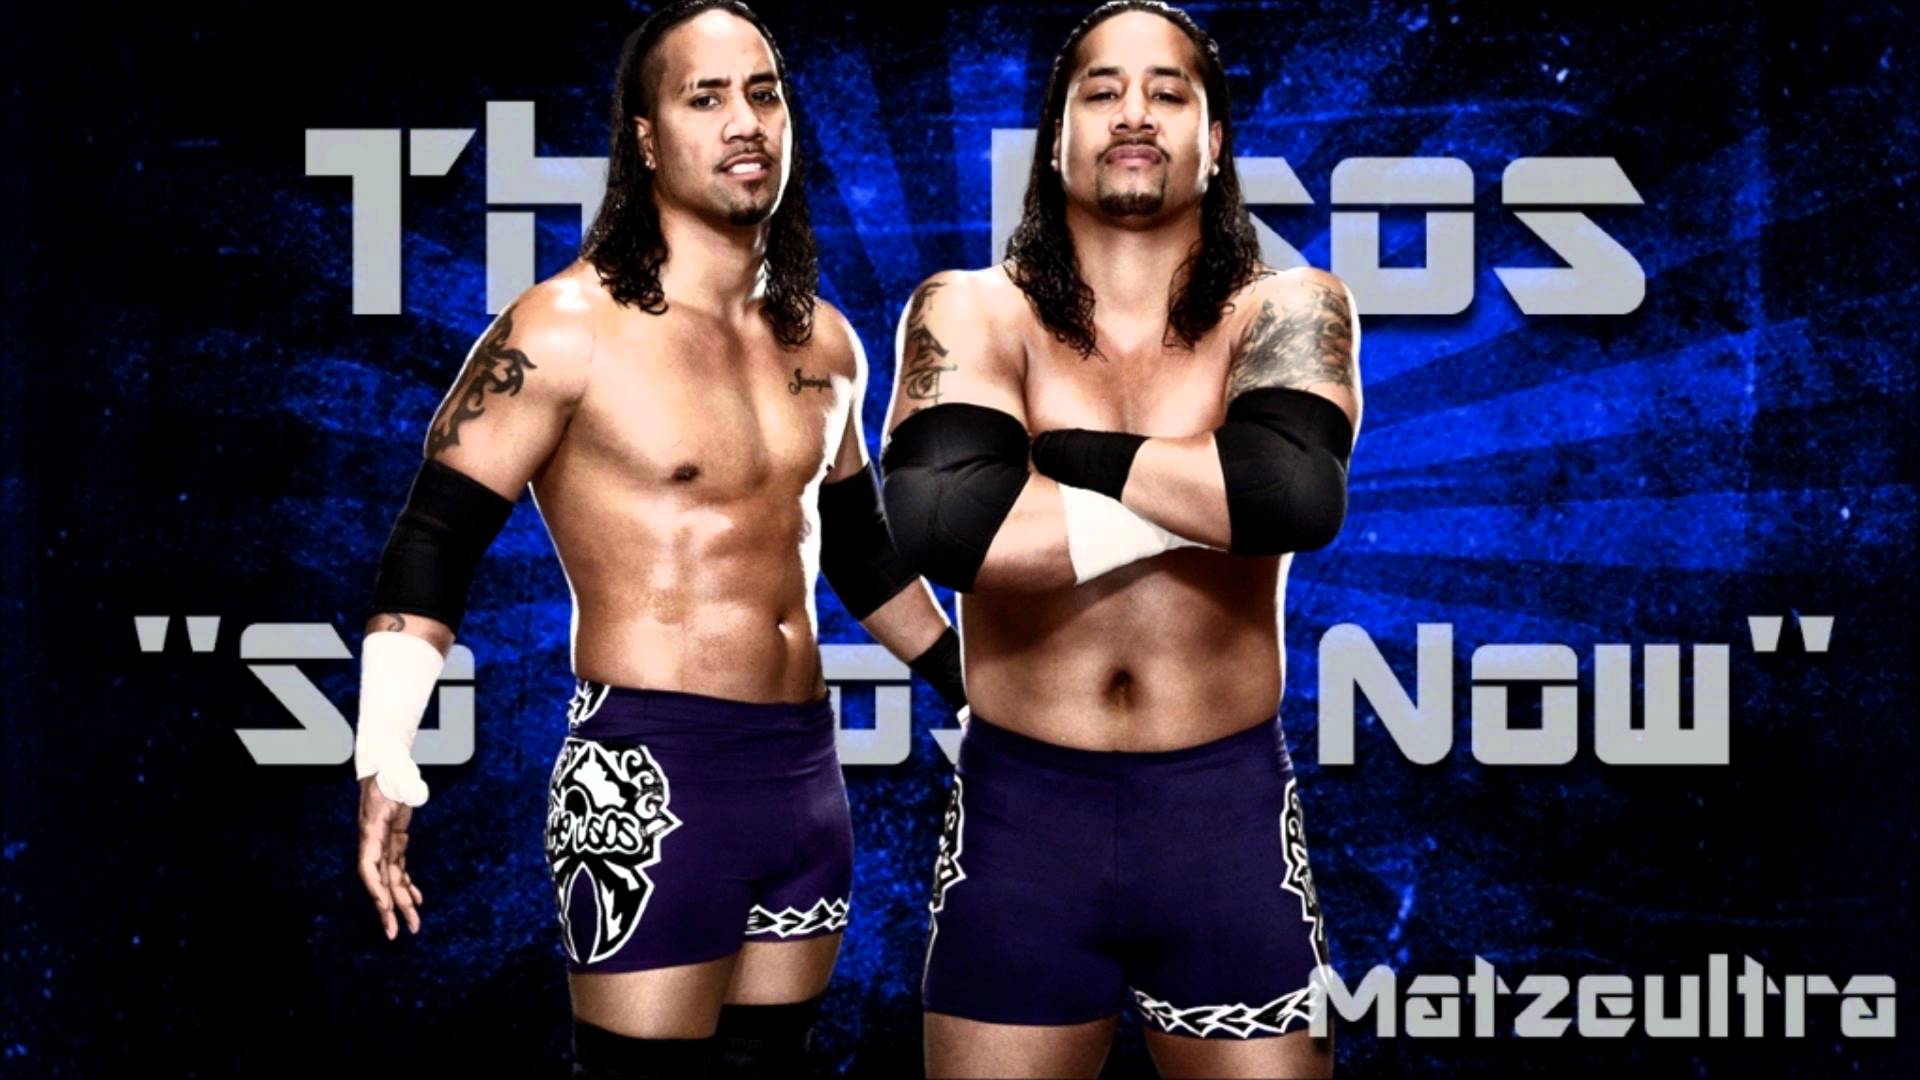 The Usos 4th Wwe Theme Song So Close Now Siva Tau Intro V2 Arena